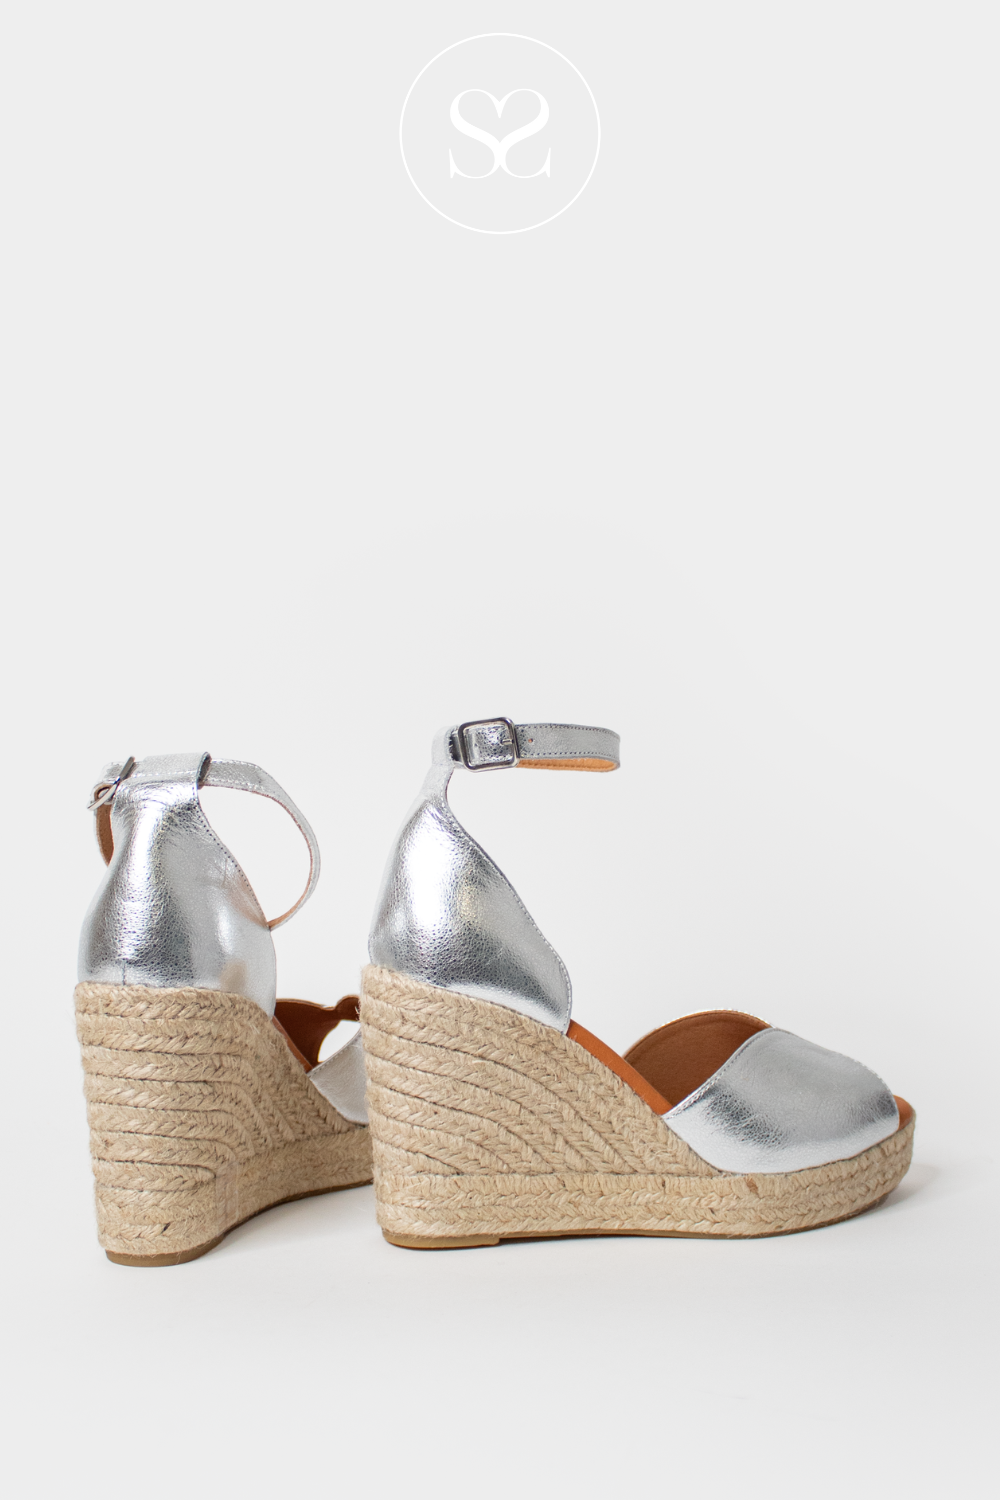 WONDERS YH-PI609 SILVER LEATHER WEDGE SUMMER SANDALS